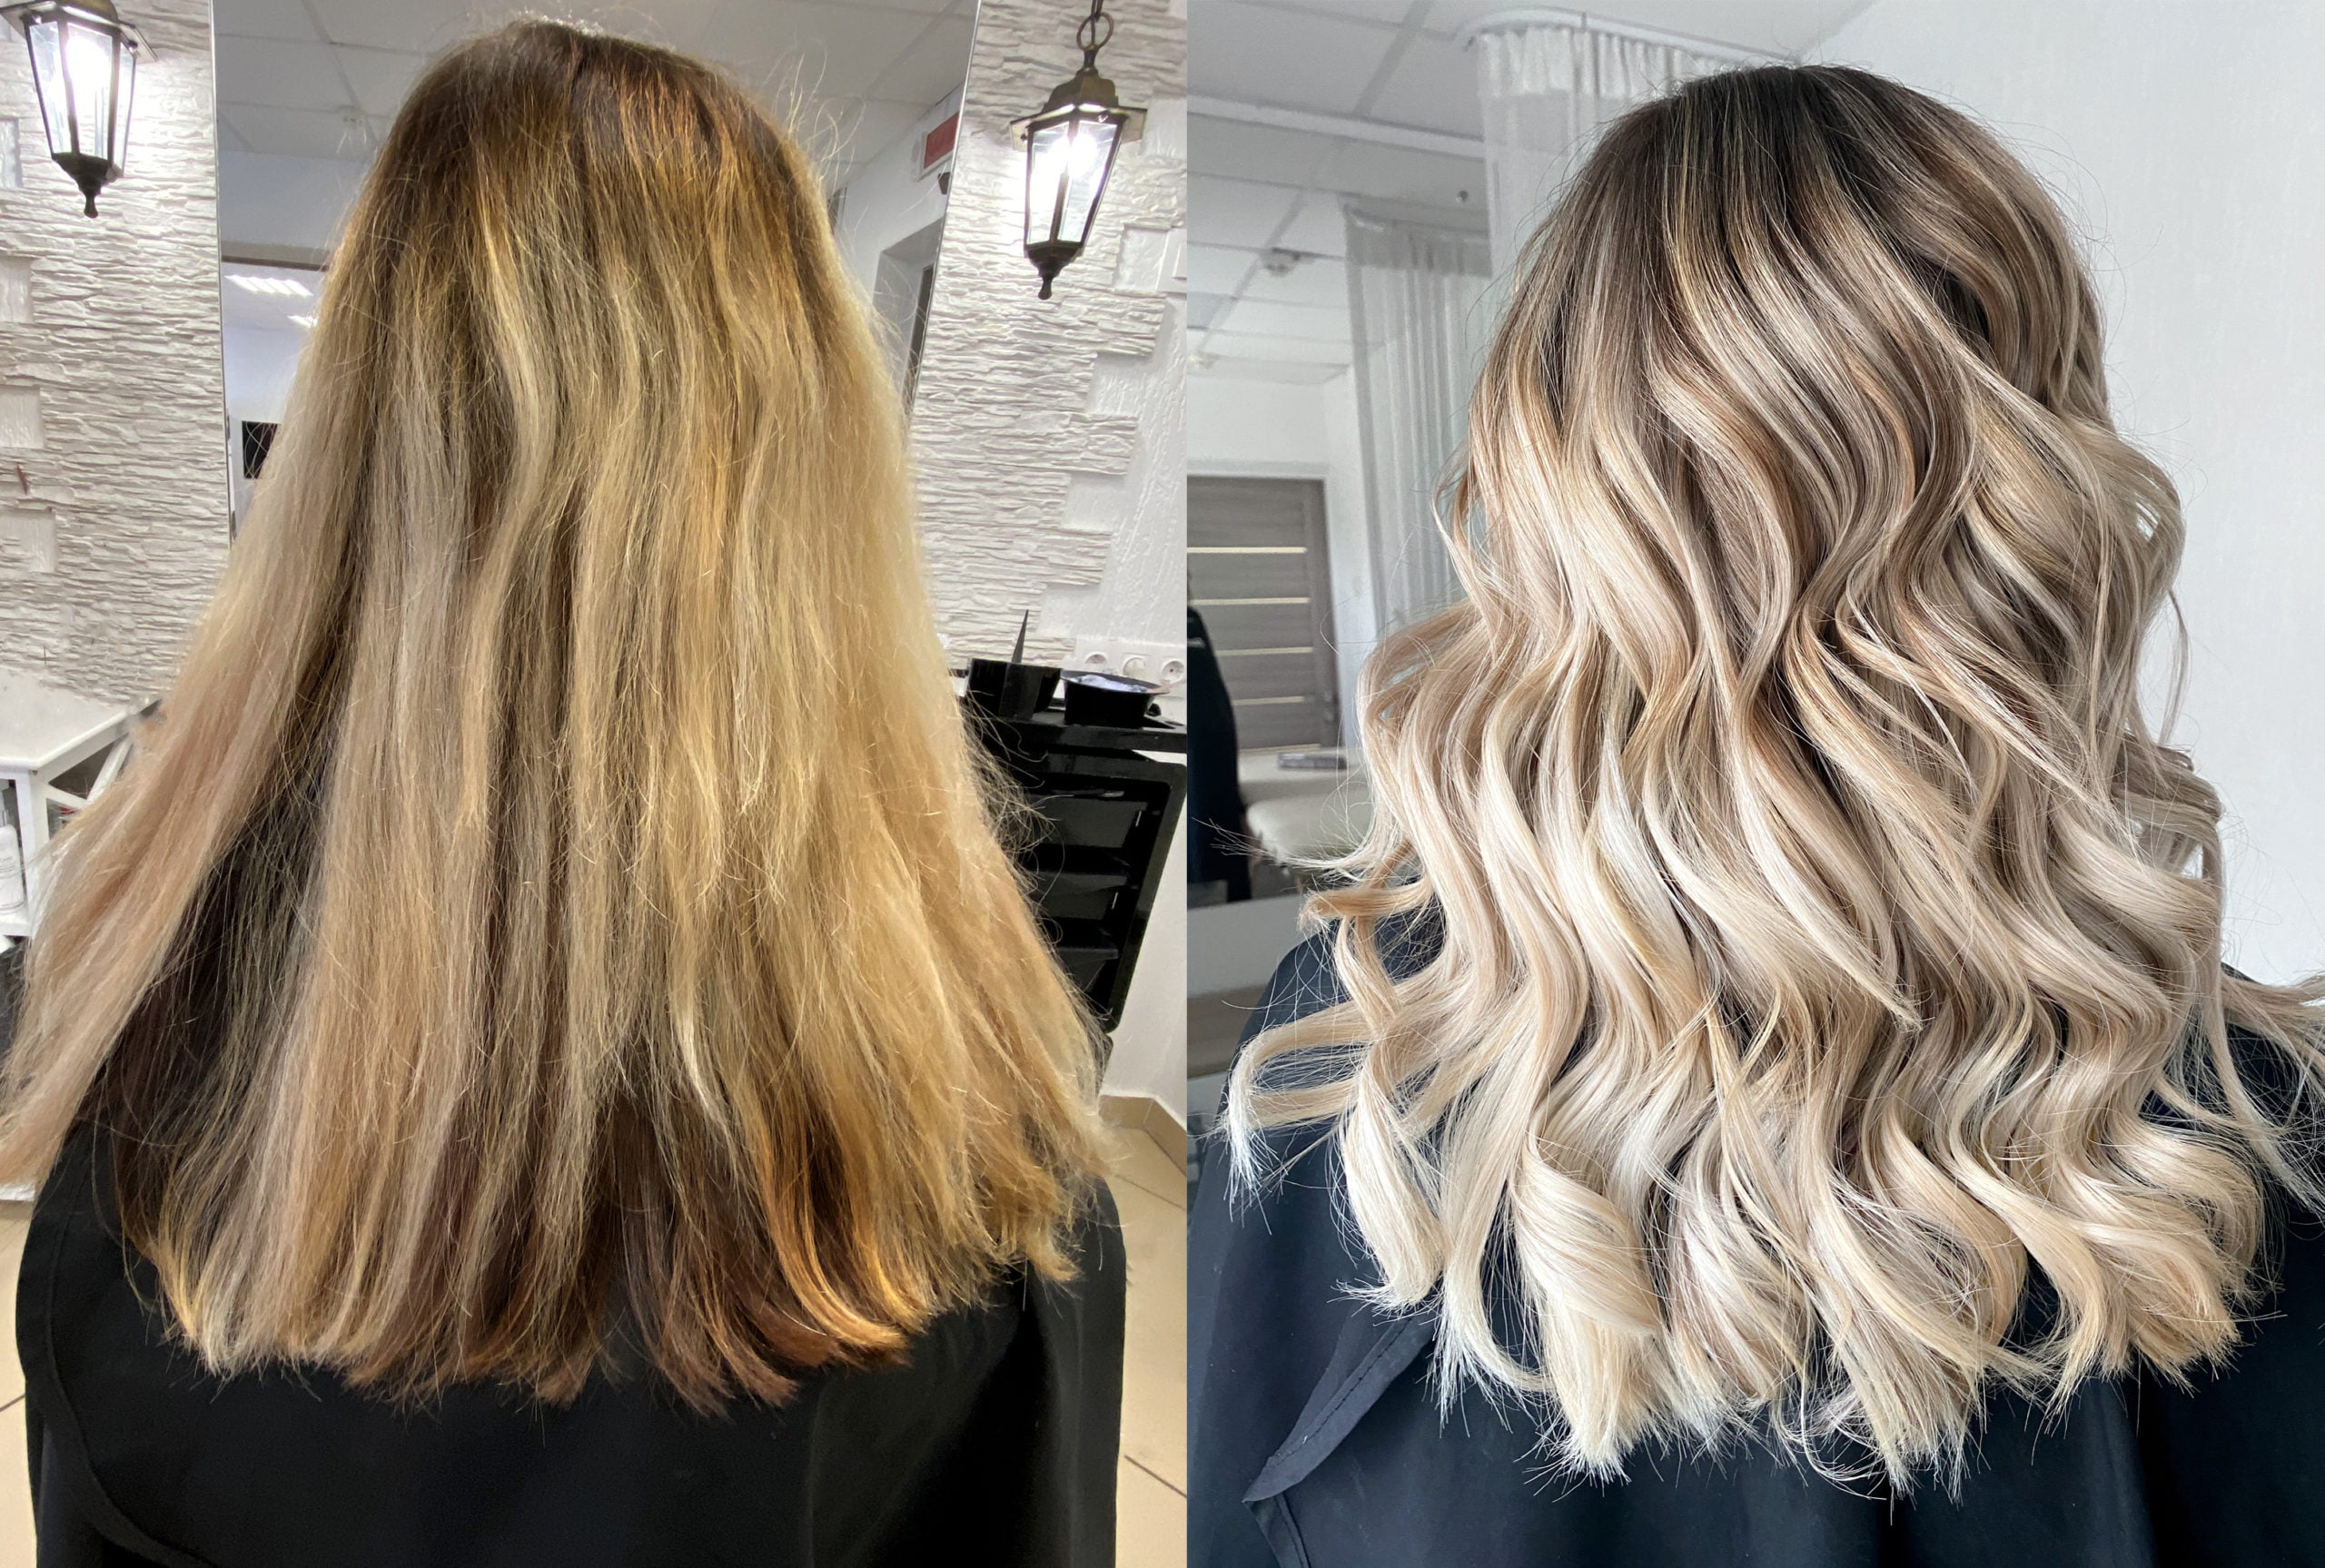 https://salontabuaz.com/storage/2022/08/Whats-the-difference-between-highlights-and-Balayage-scaled.jpeg